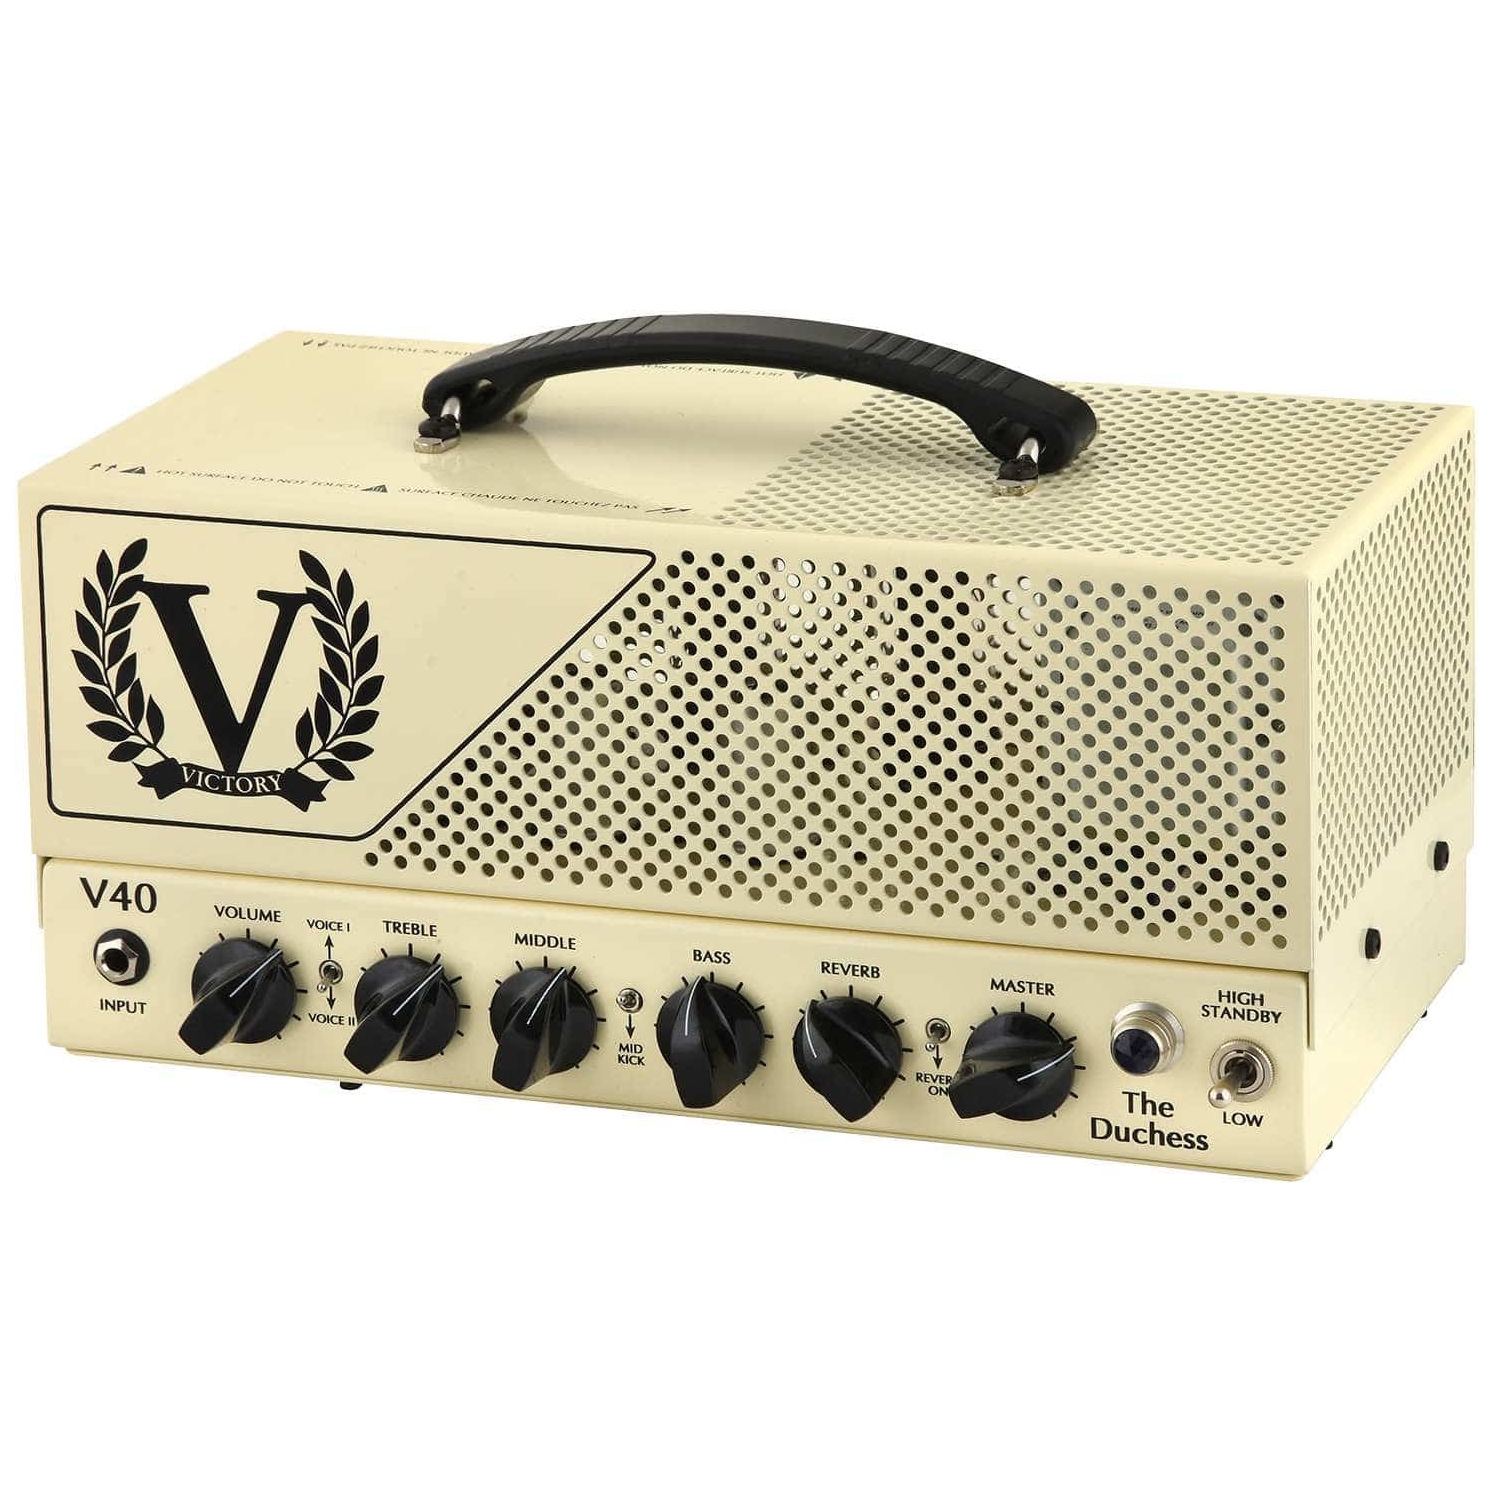 Victory Amps V40H The Duchess B-Ware